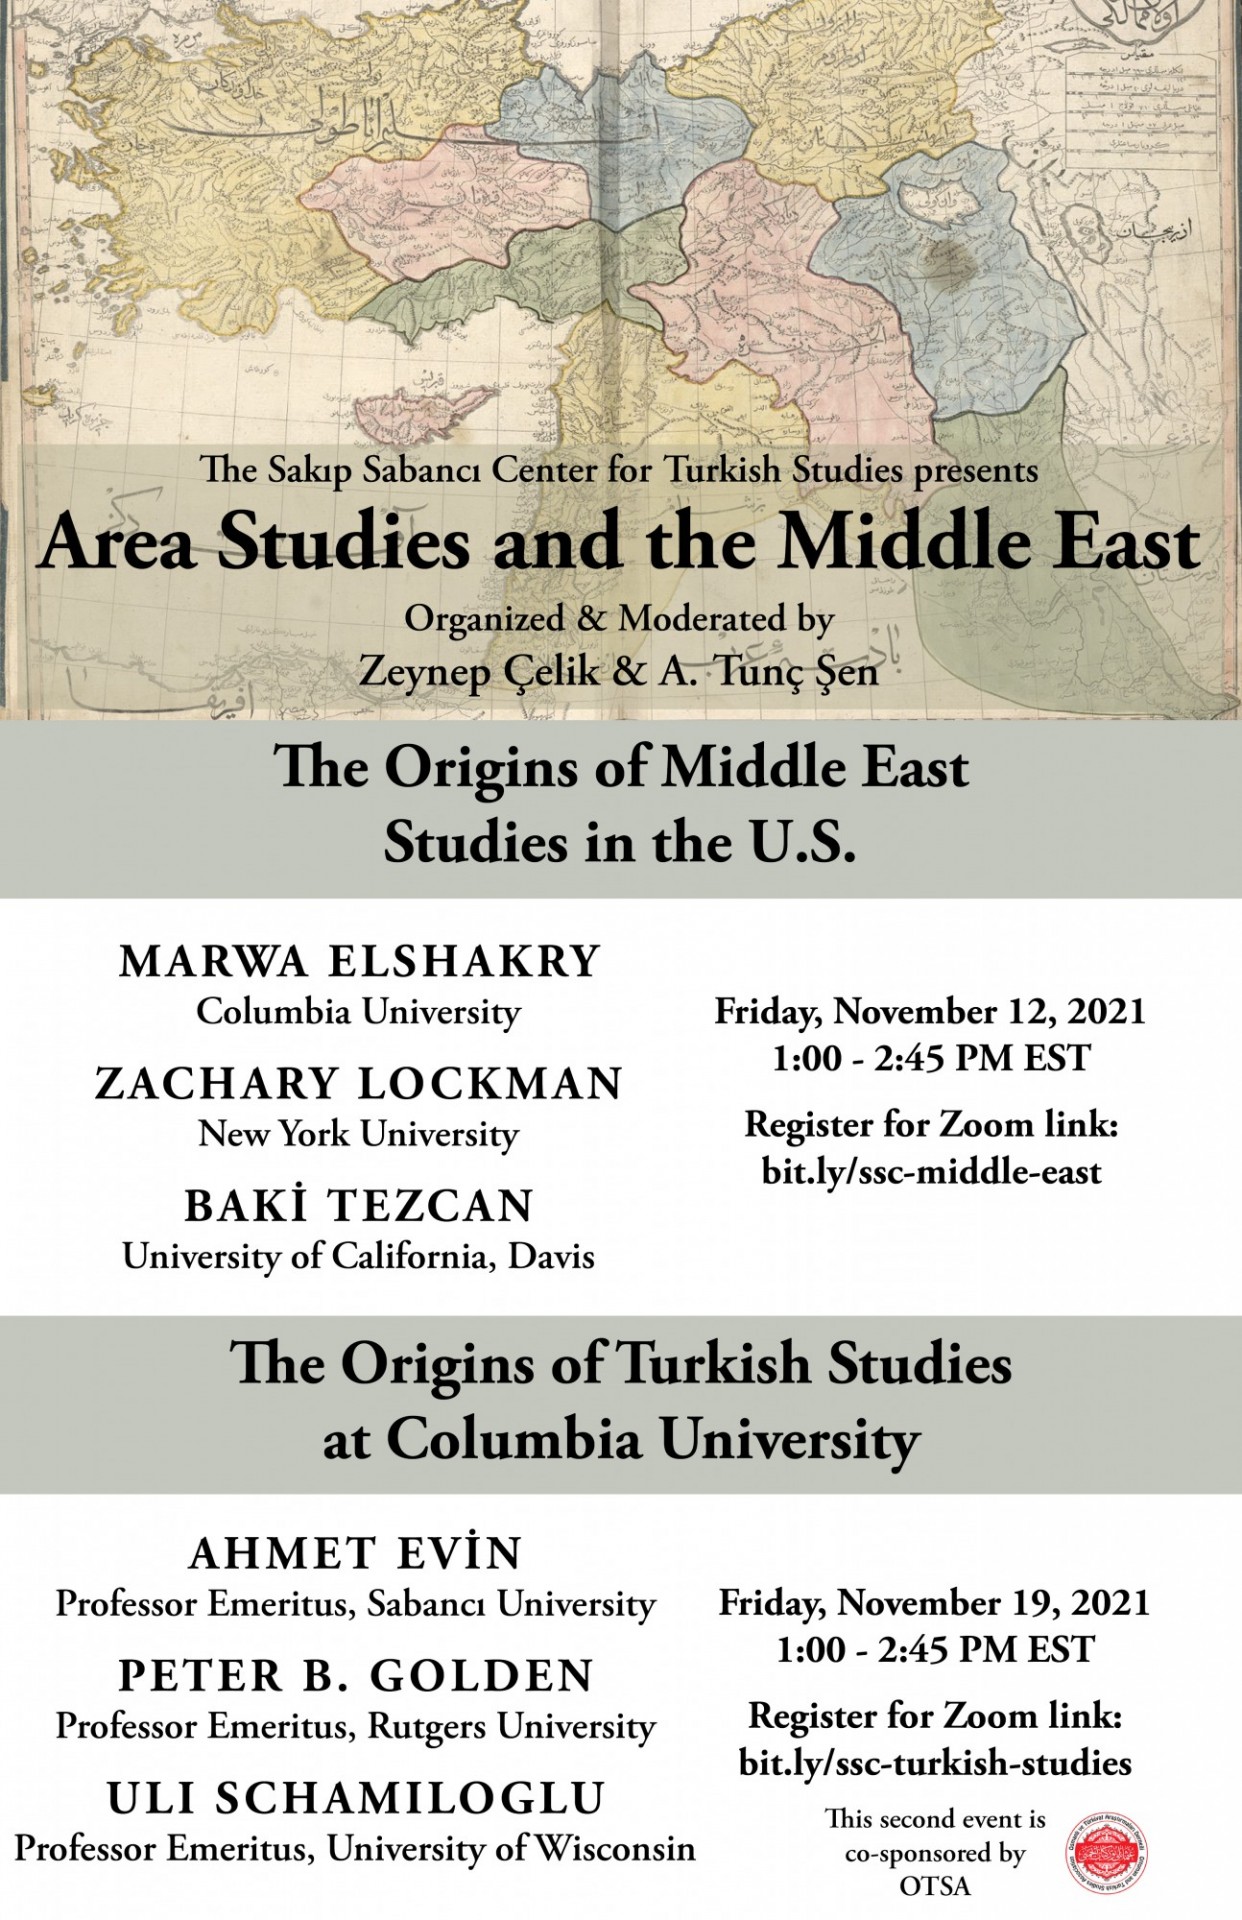 Flyer advertising the event series "Area Studies and the Middle East"